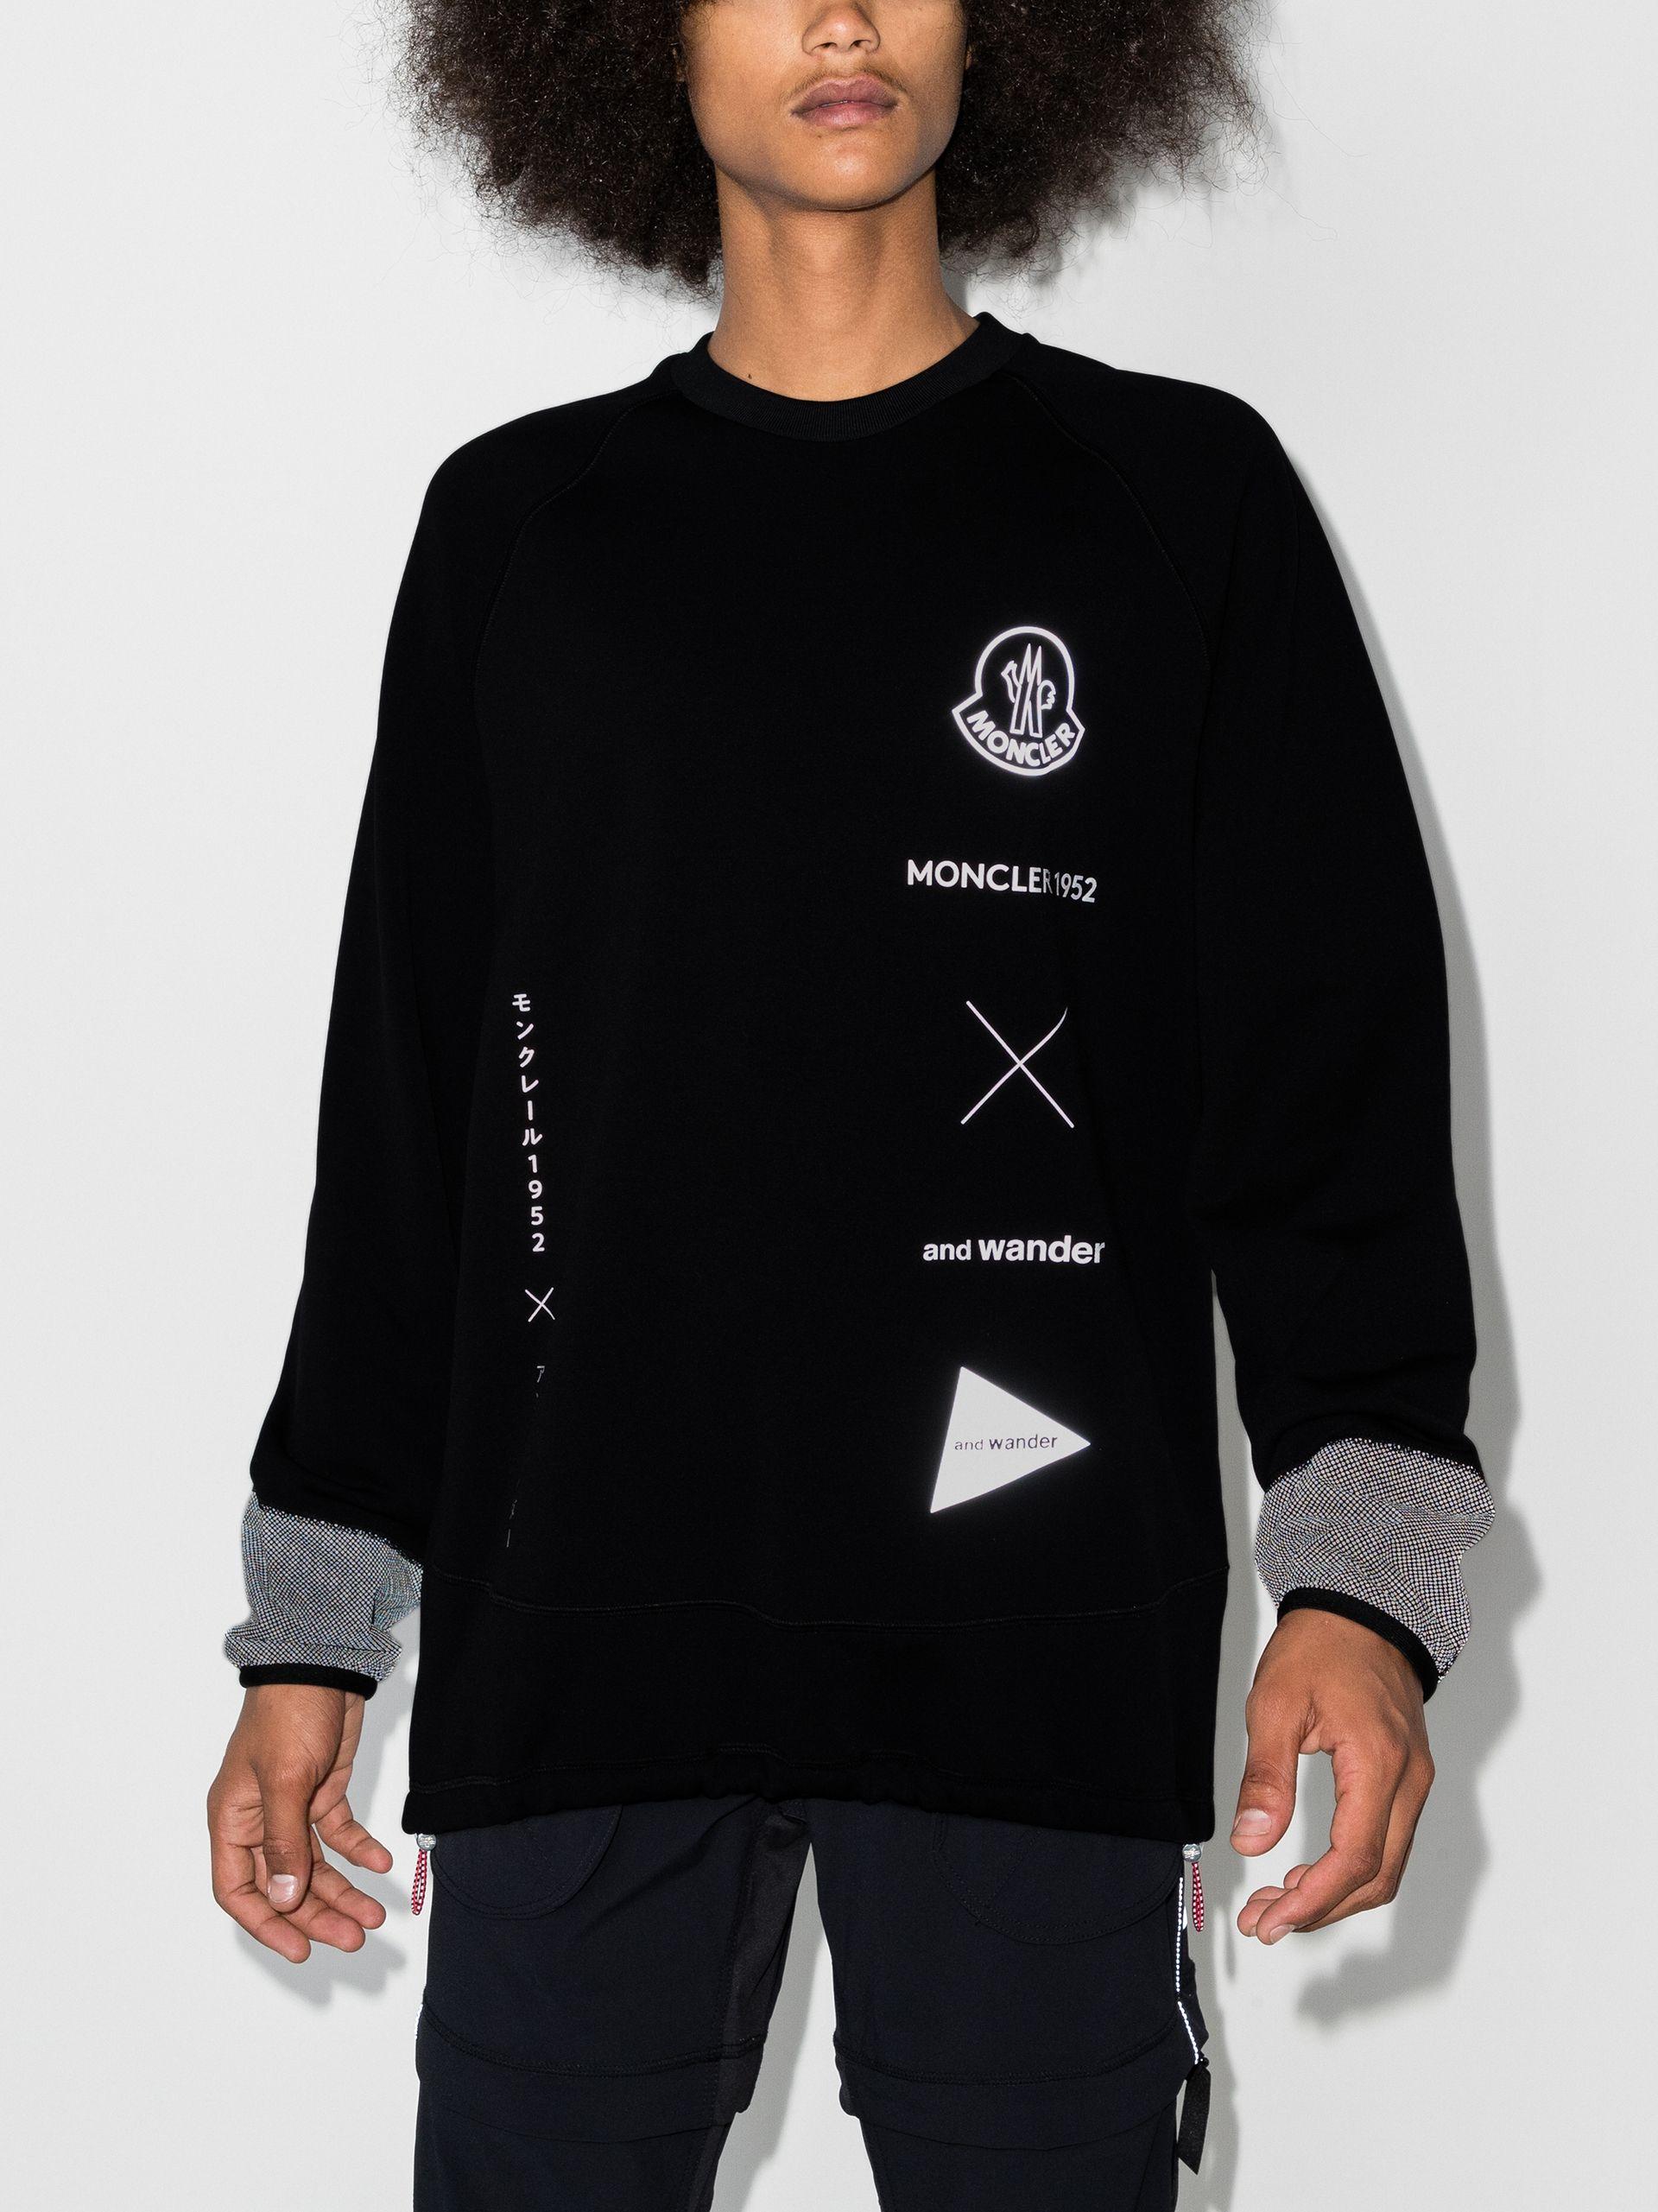 Moncler Genius Synthetic 2 Moncler 1952 X And Wander Logo 